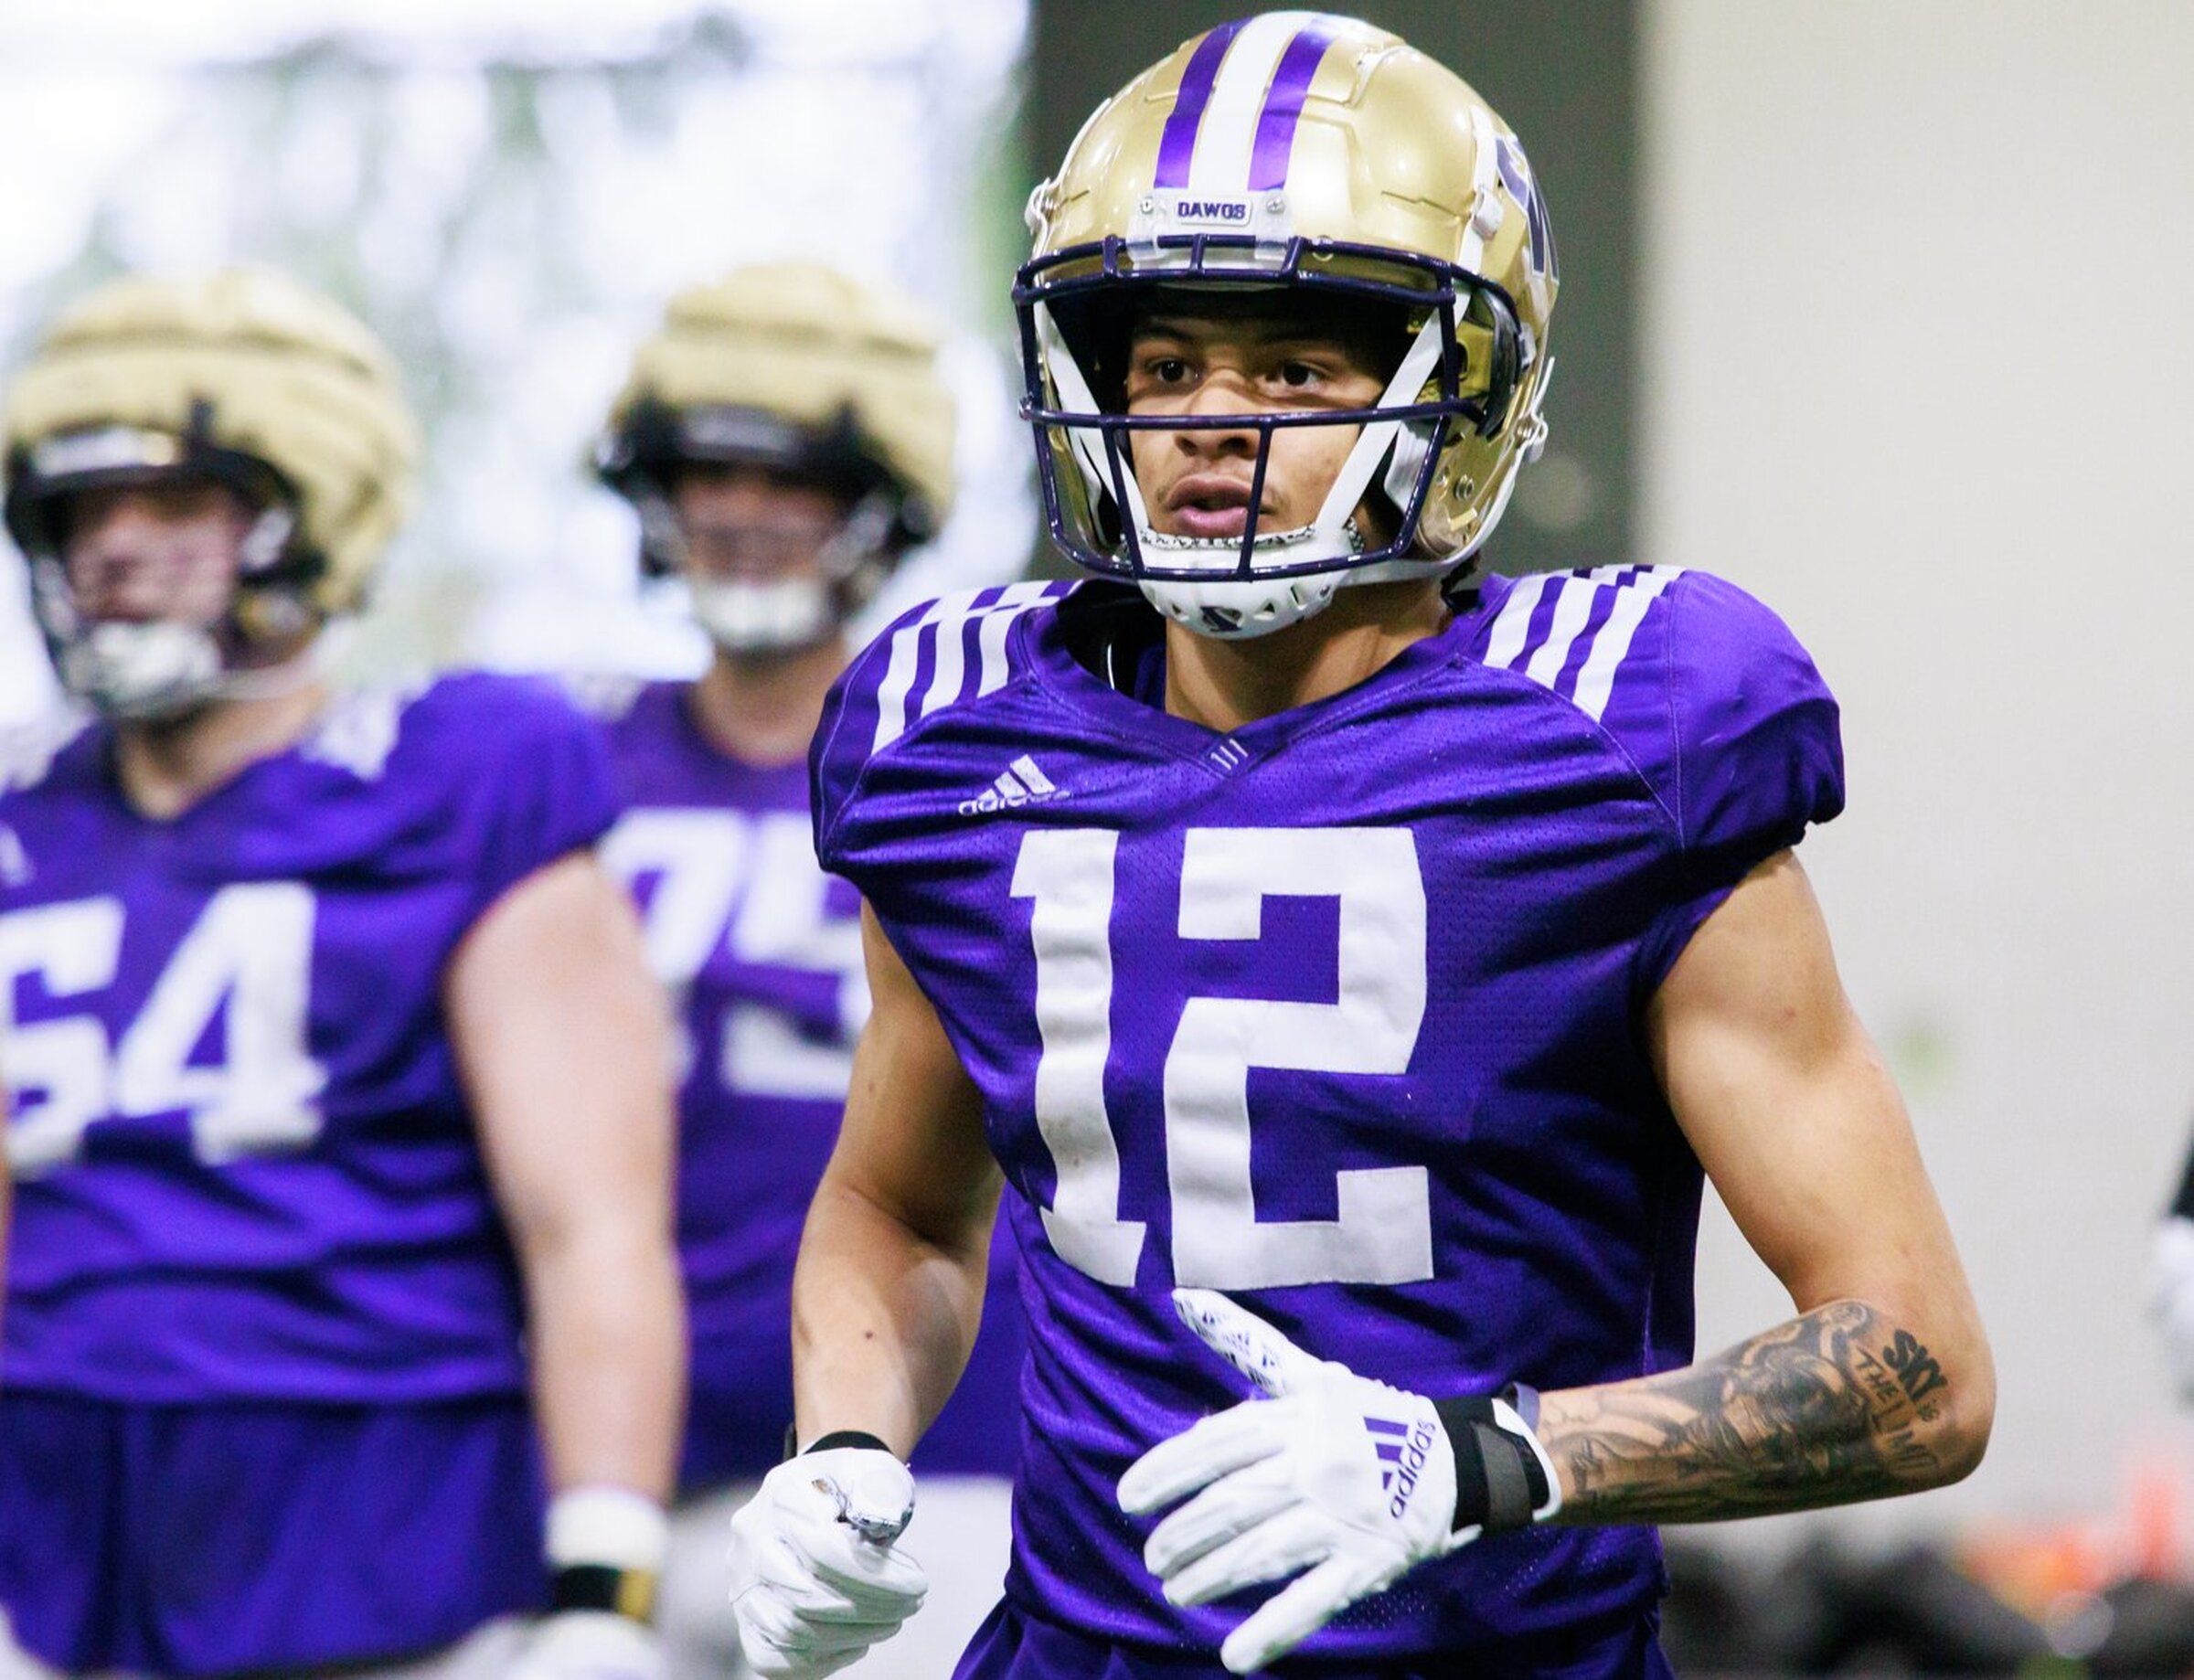 When it comes to UW's loaded WR room, Denzel Boston may be next in